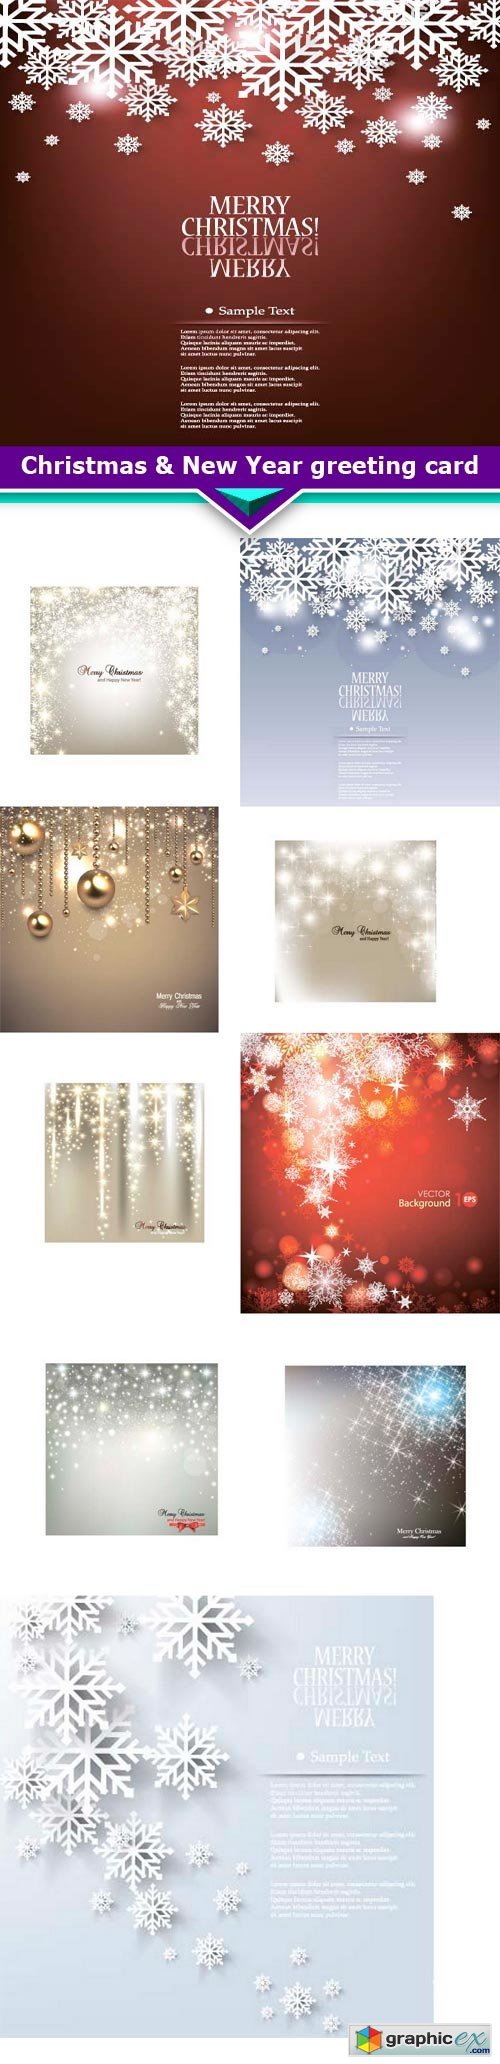 Christmas & New Year greeting card 10x EPS